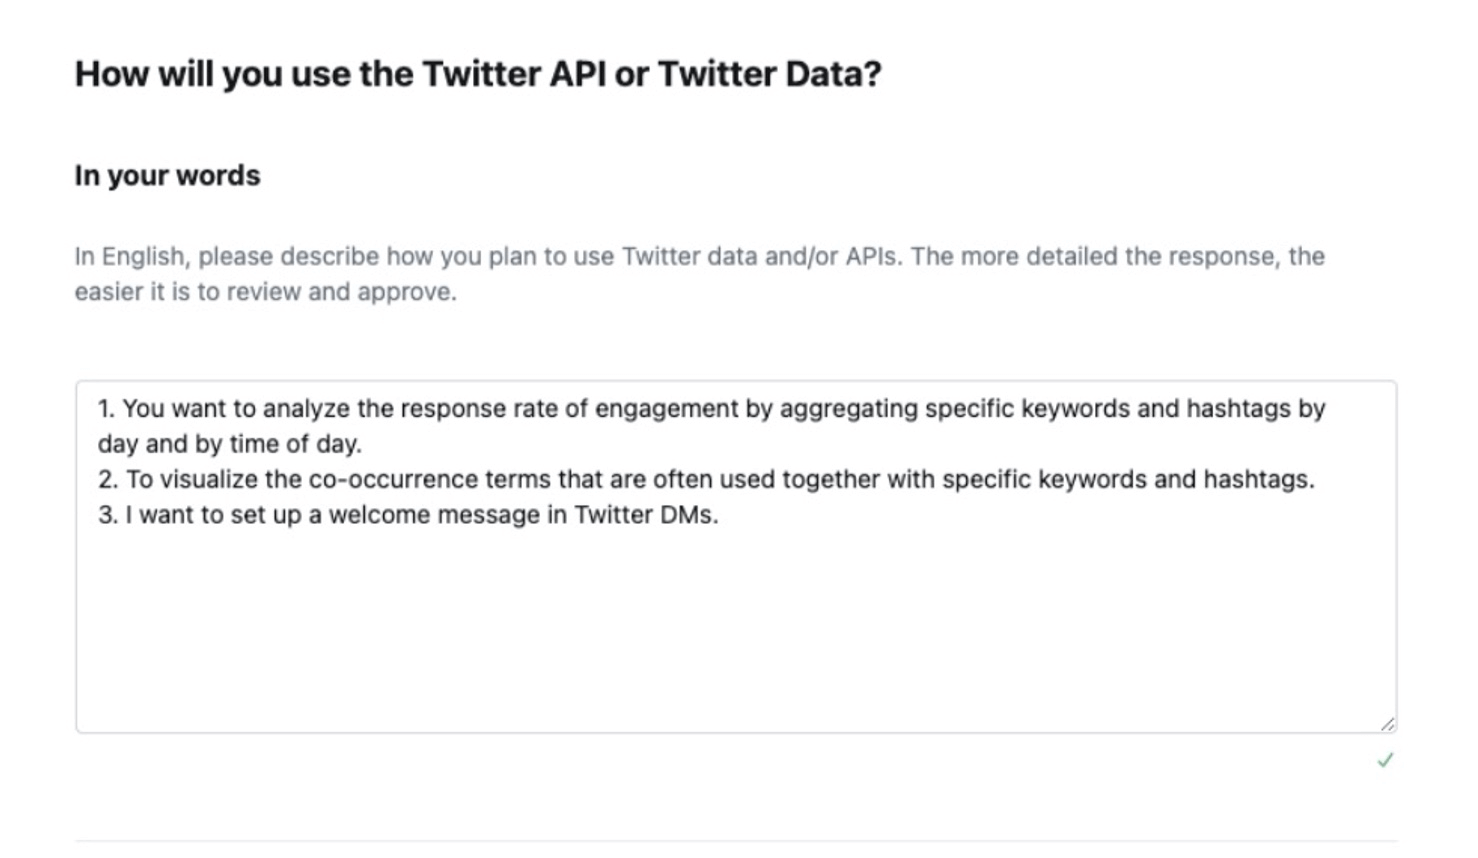 How will you user the Twitter API or Twitter Data?